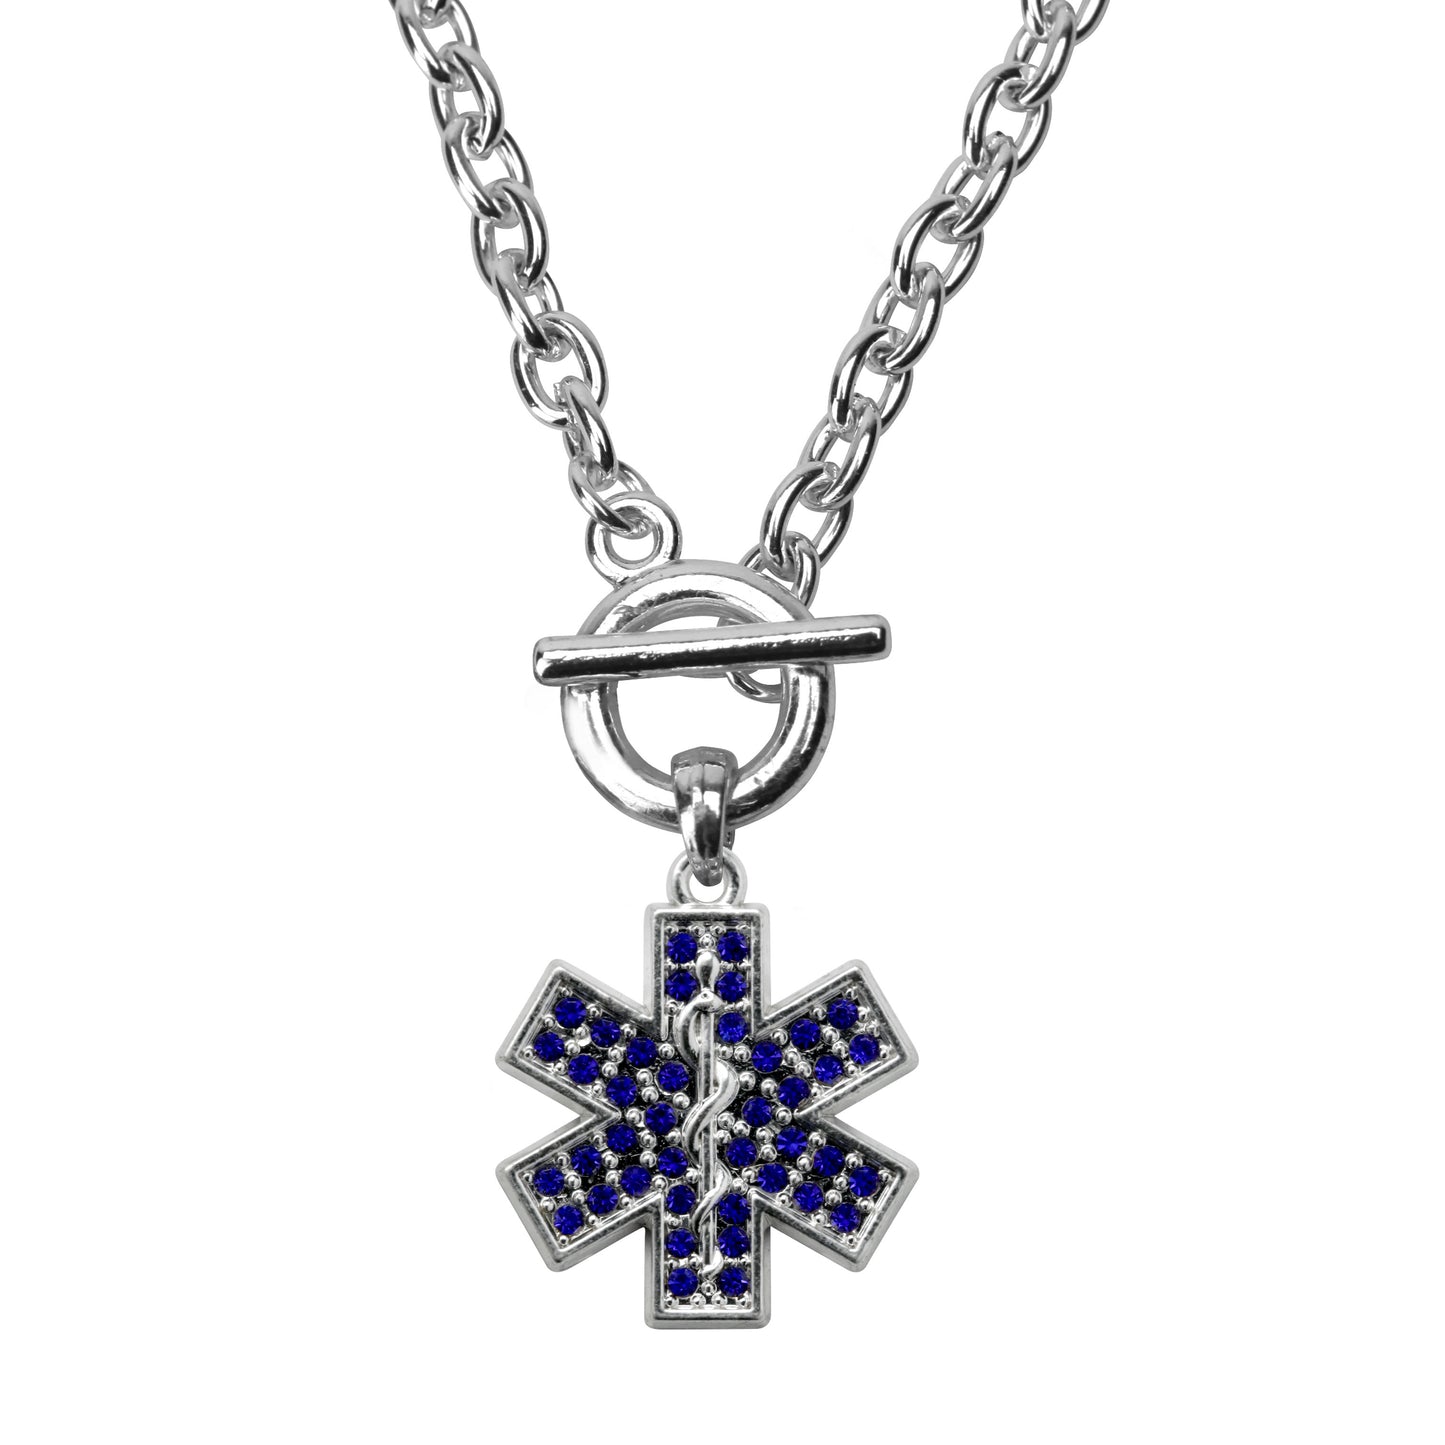 Silver EMT Charm Toggle Necklace